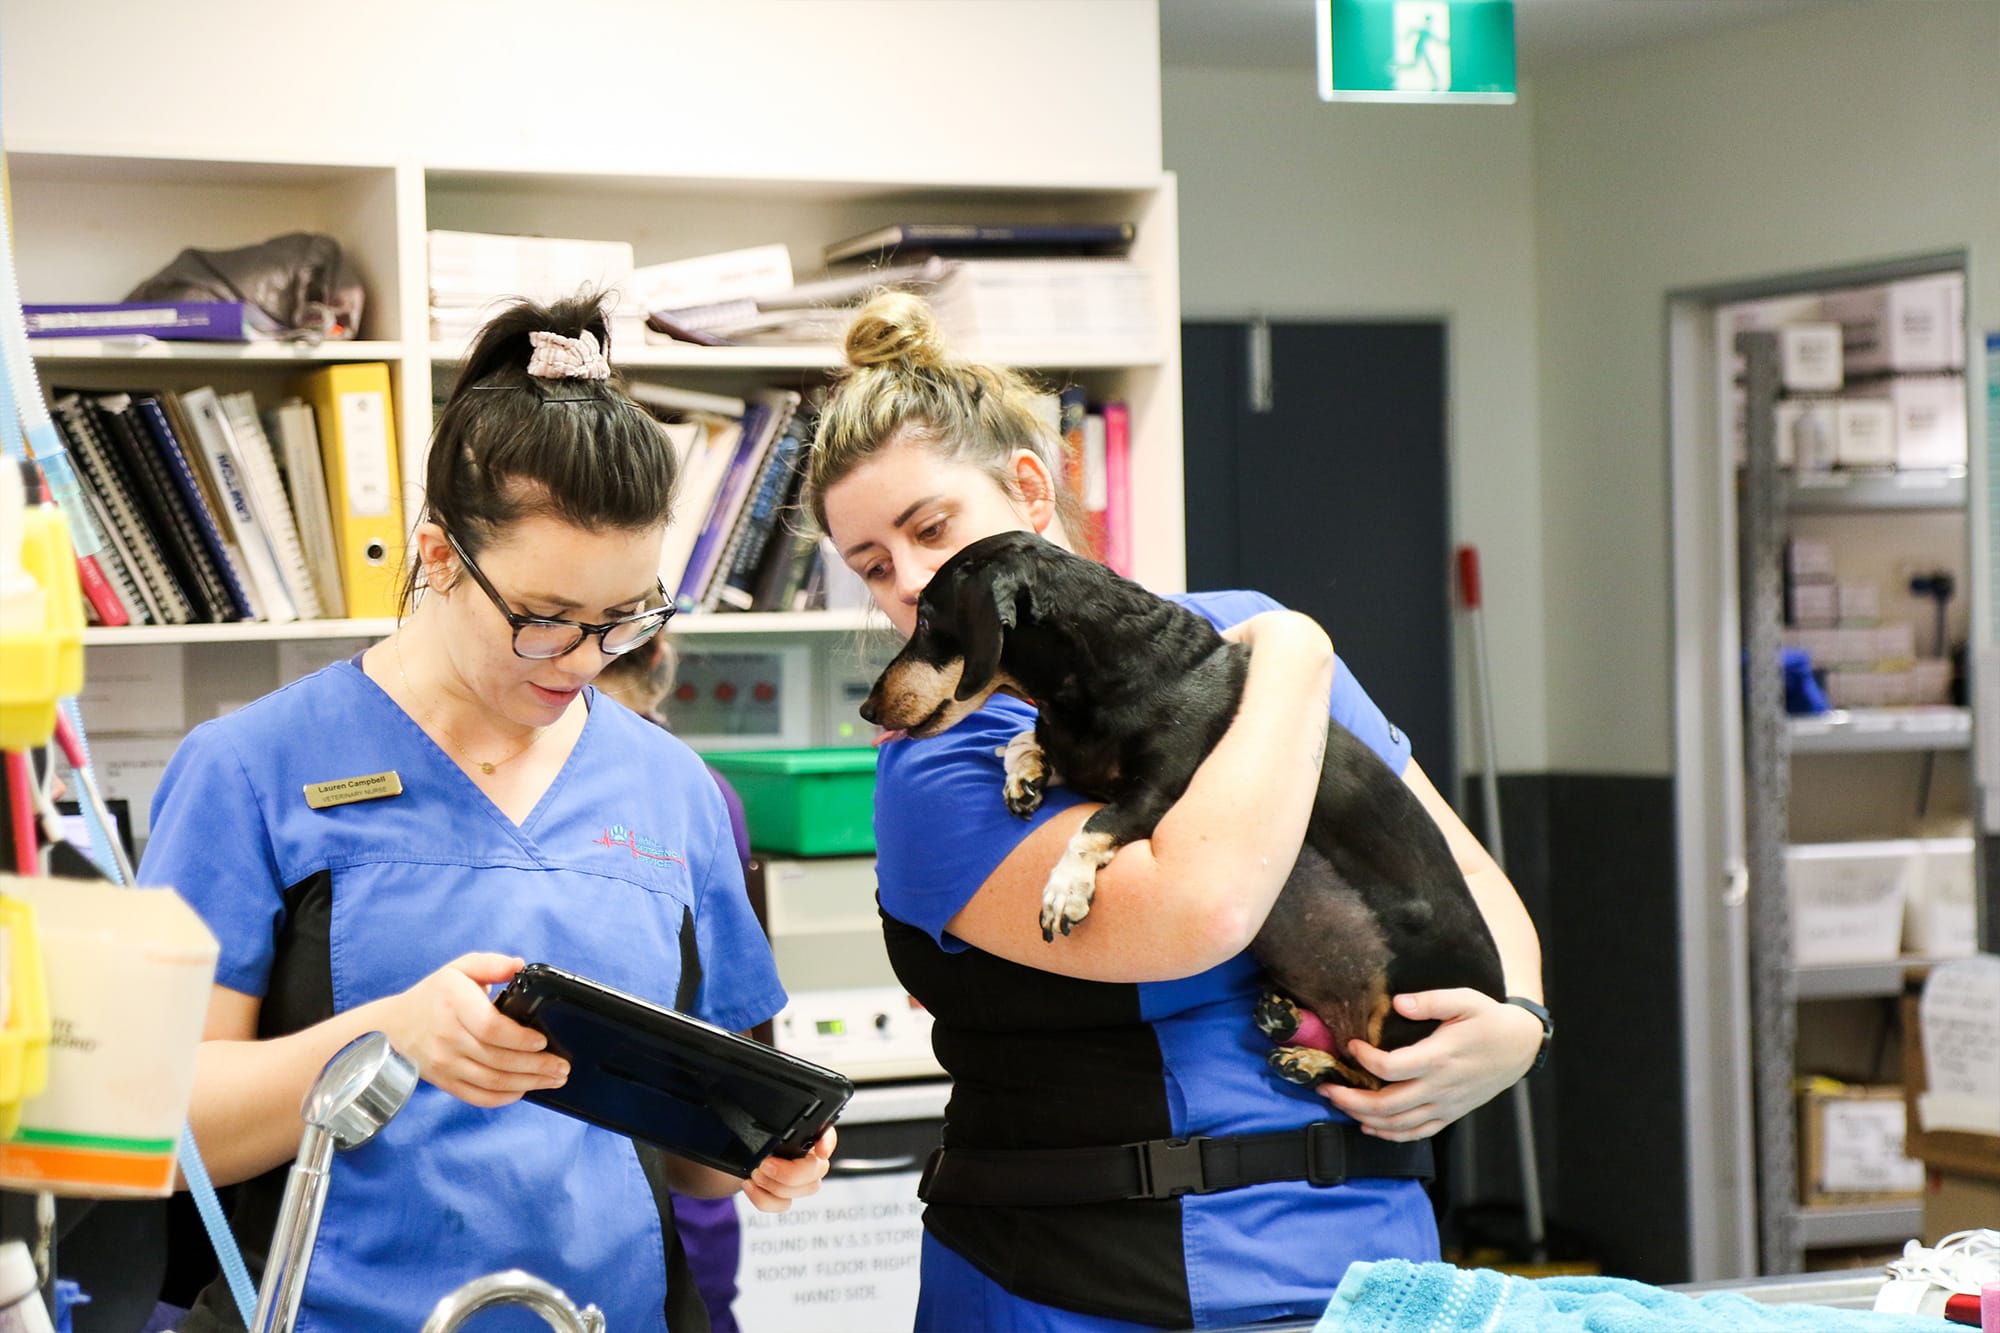 Two veterinary nurses at Animal Emergency Service Carrara talking with a dachshund on the arm, at emergency vet Gold Coast